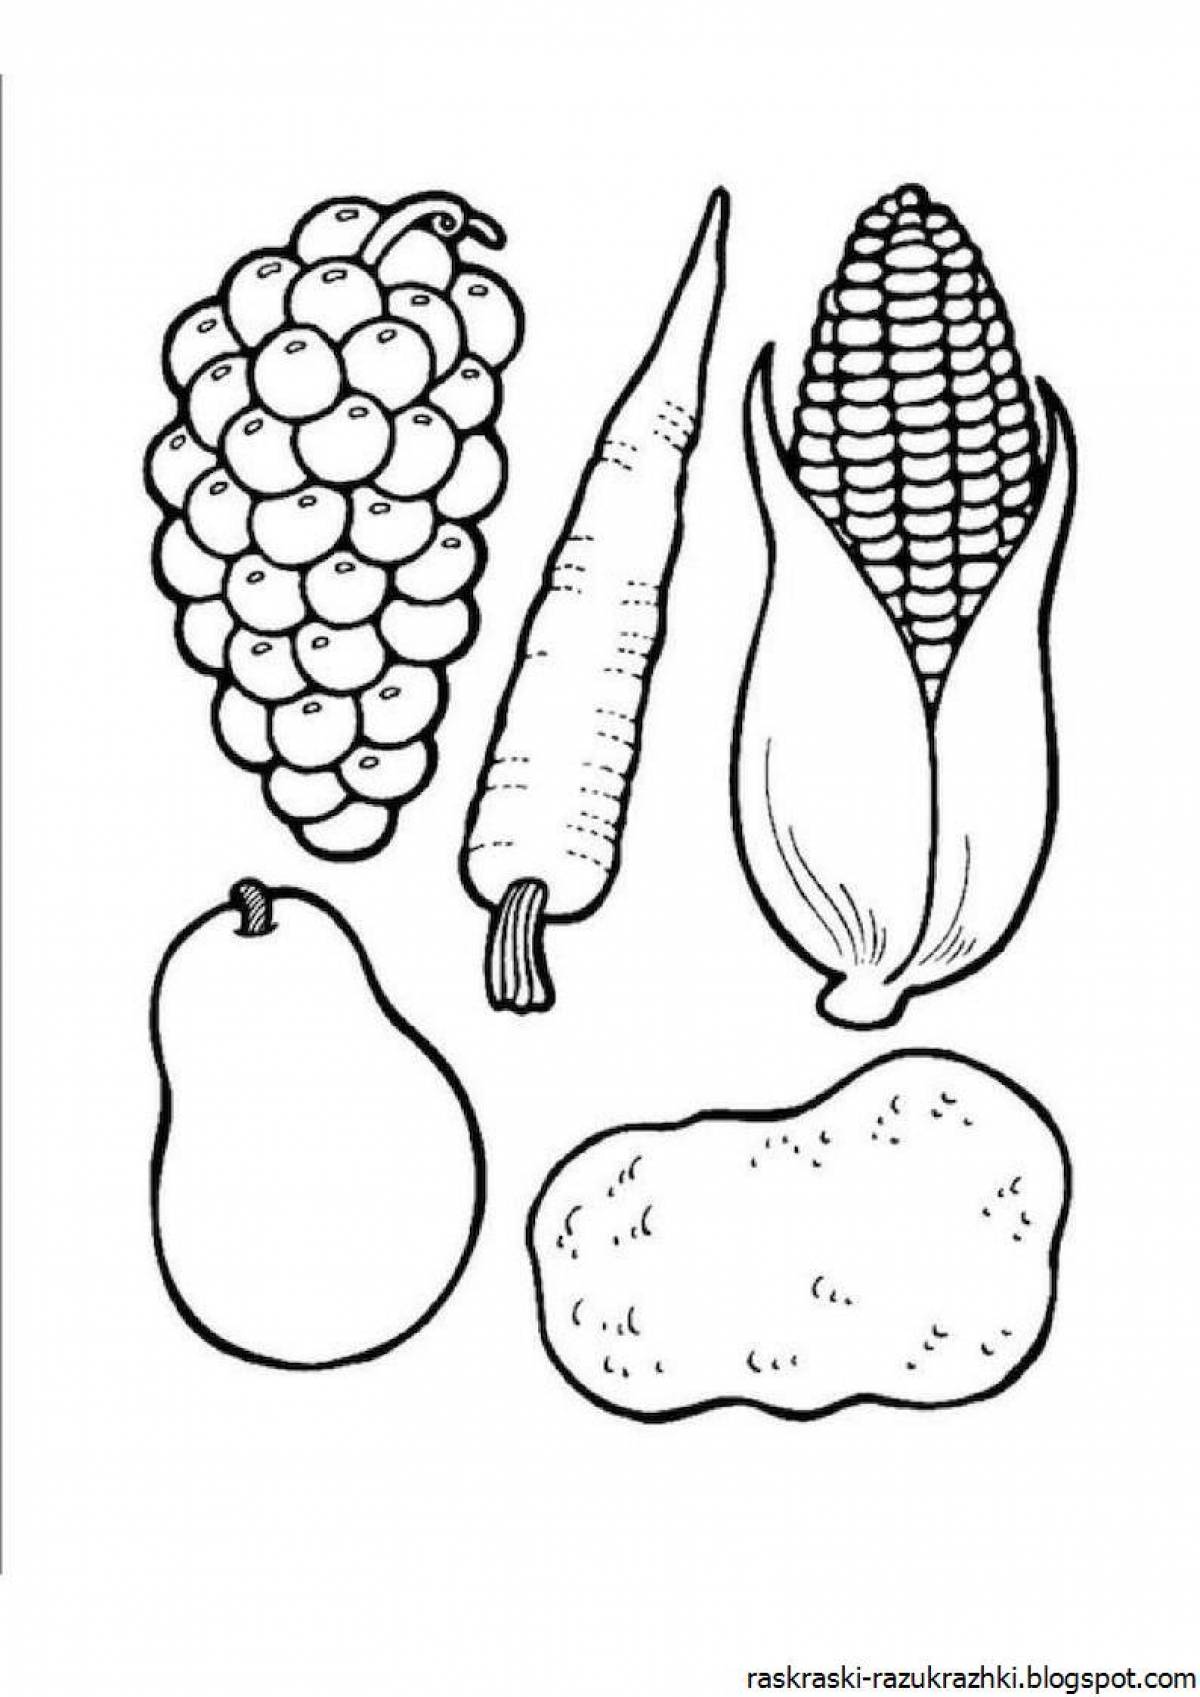 Outstanding fruits and vegetables coloring pages for kids